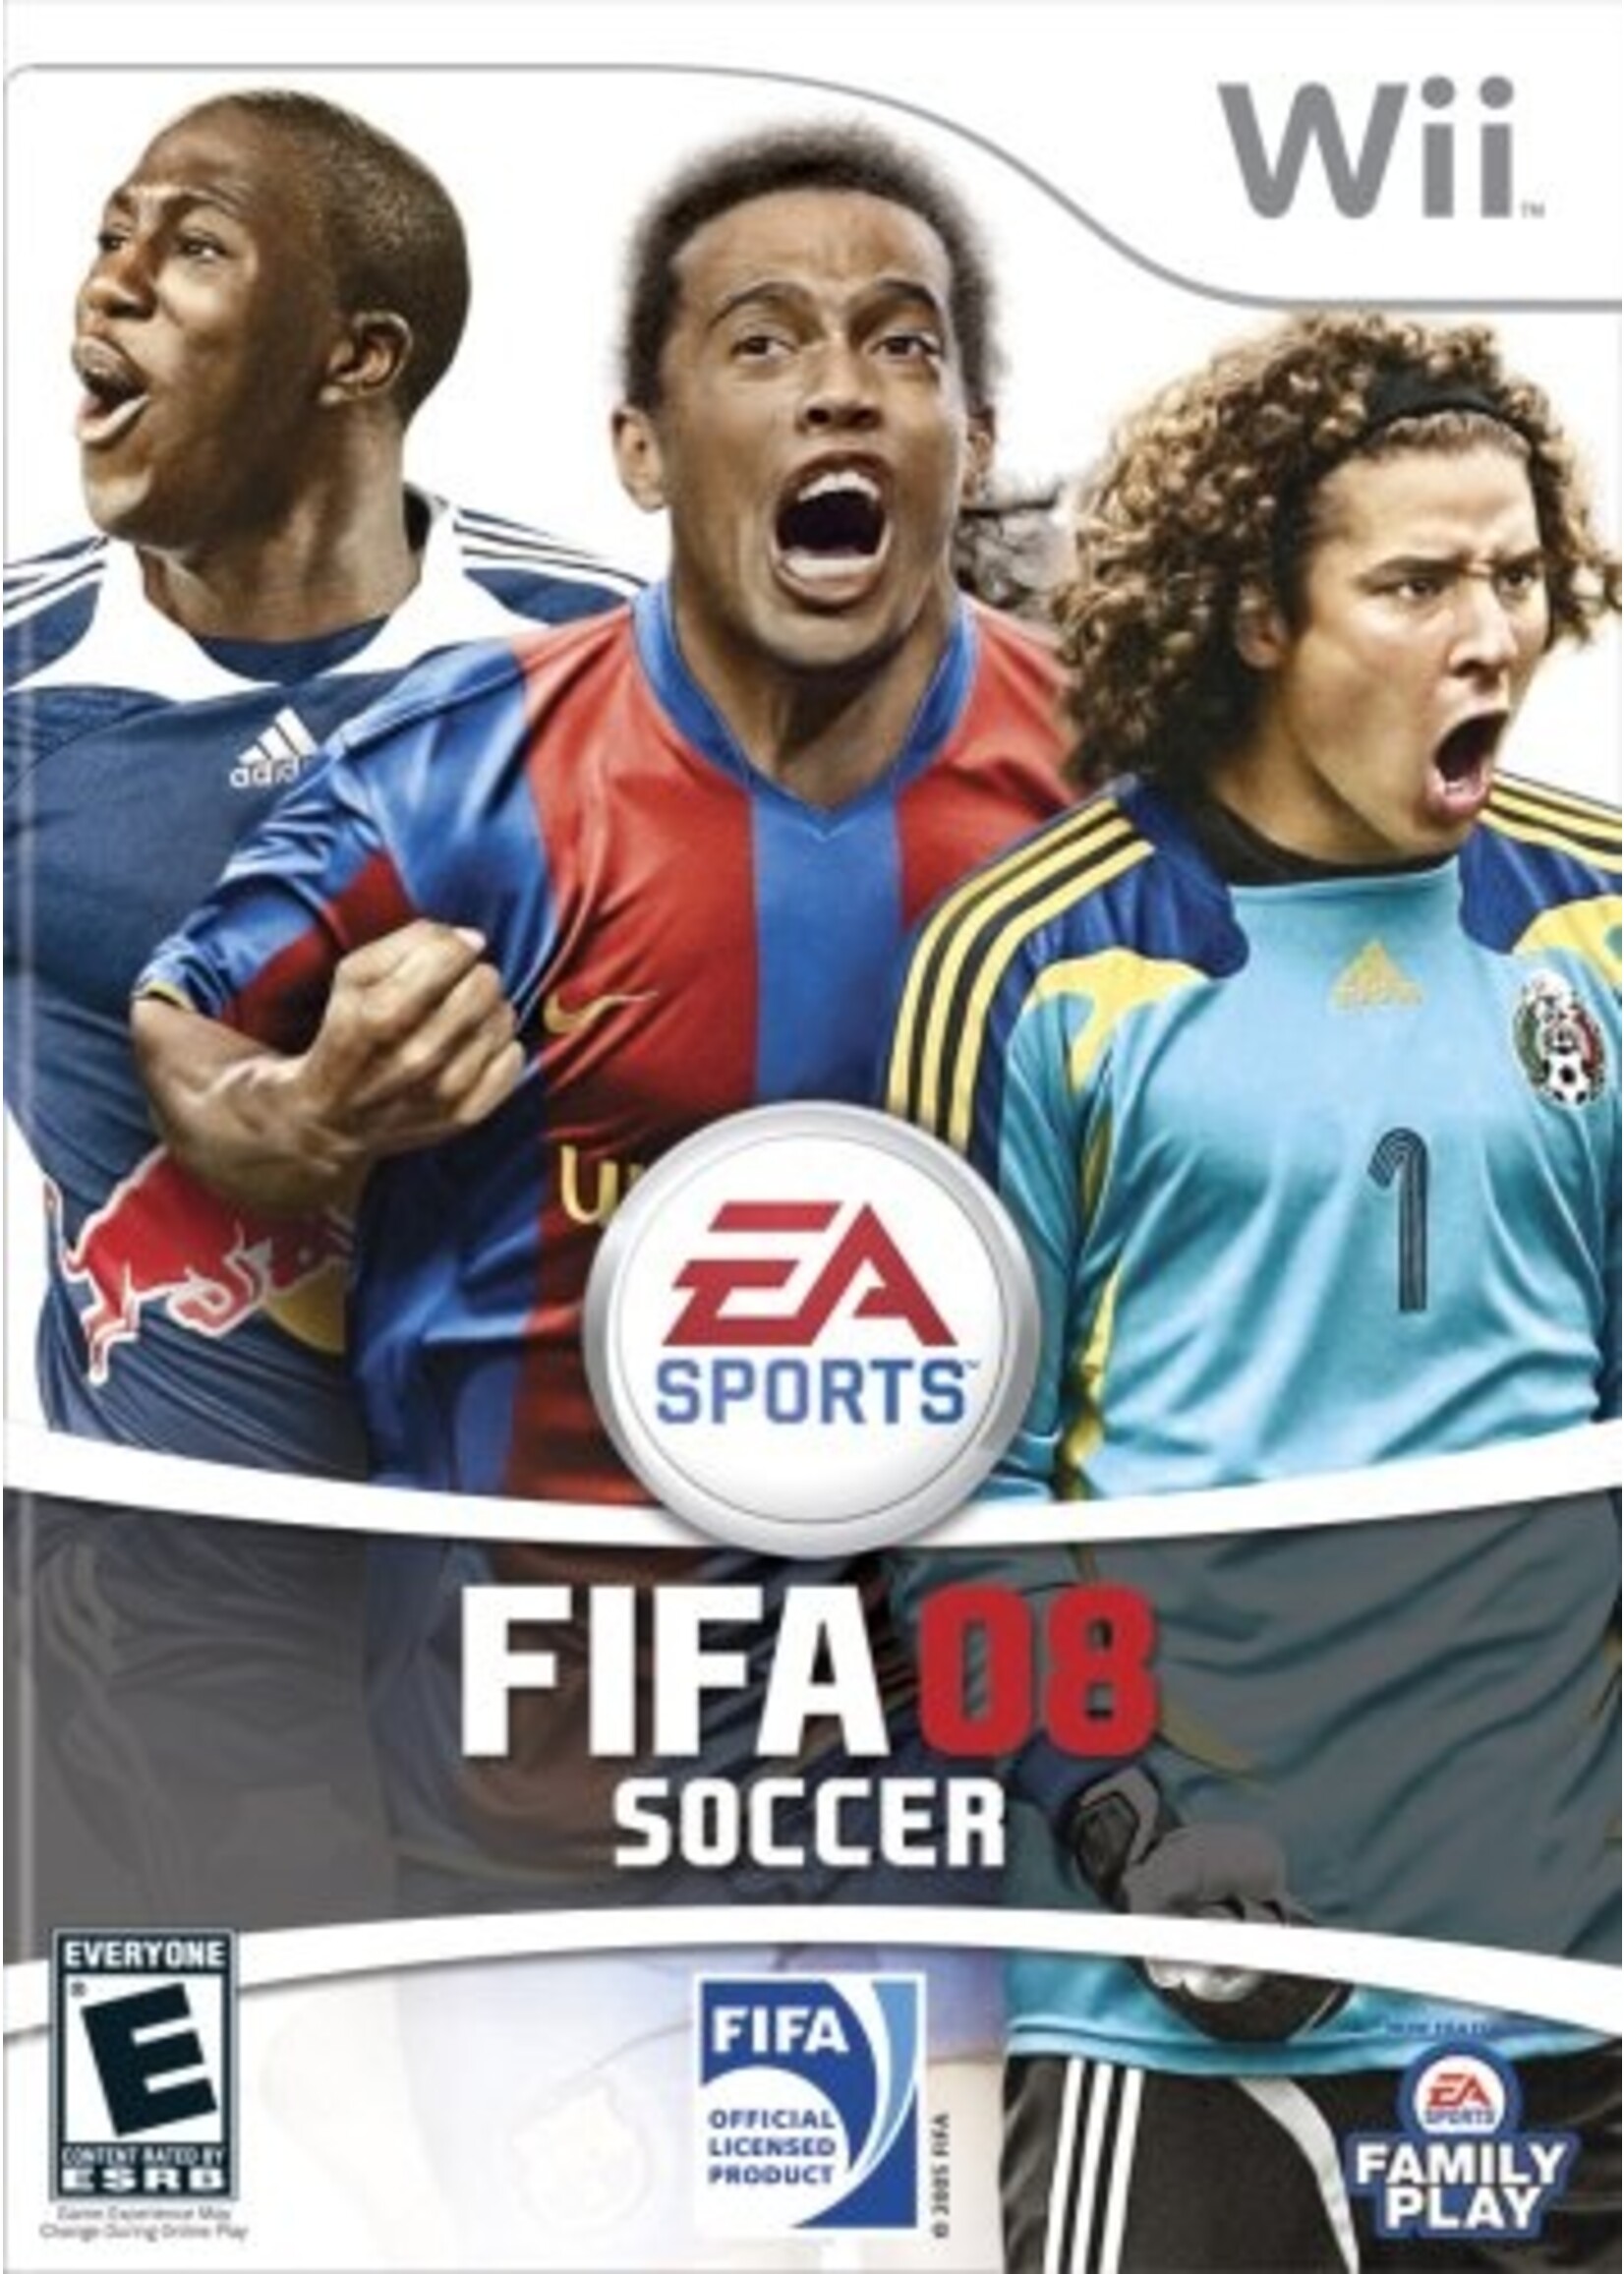 FIFA 08 Soccer - WII PrePlayed